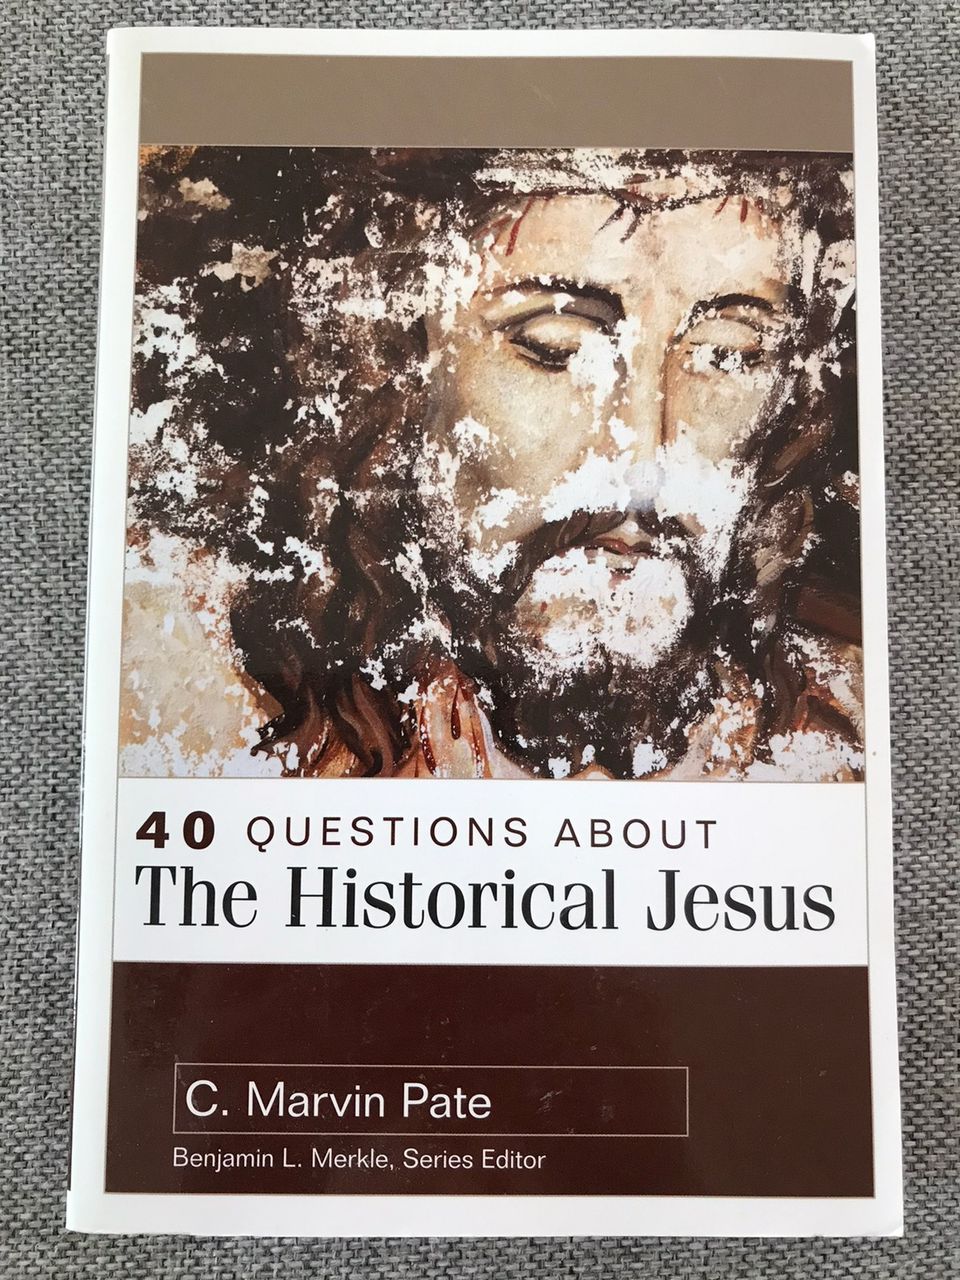 40 questions about The Historical Jesus